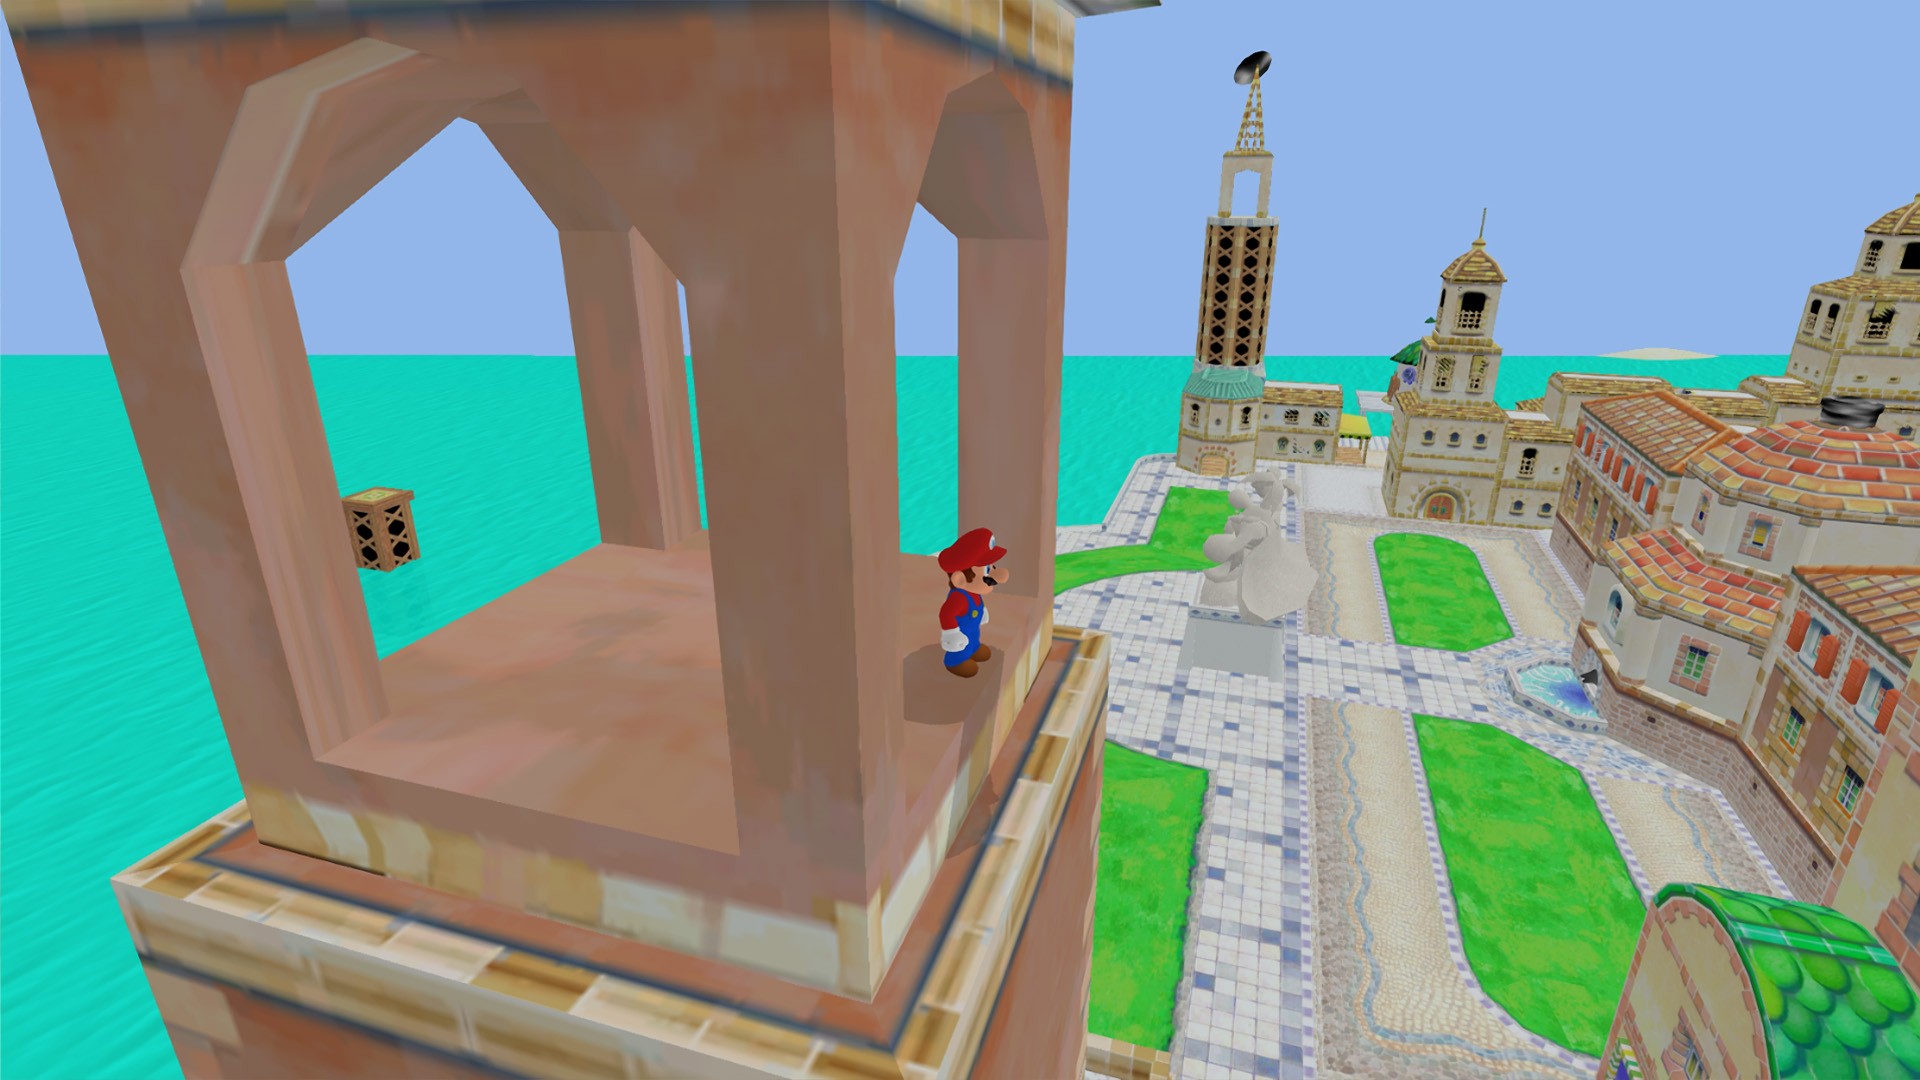 3D Game screenshot: Mario overlooking an optimized & camera culled city.